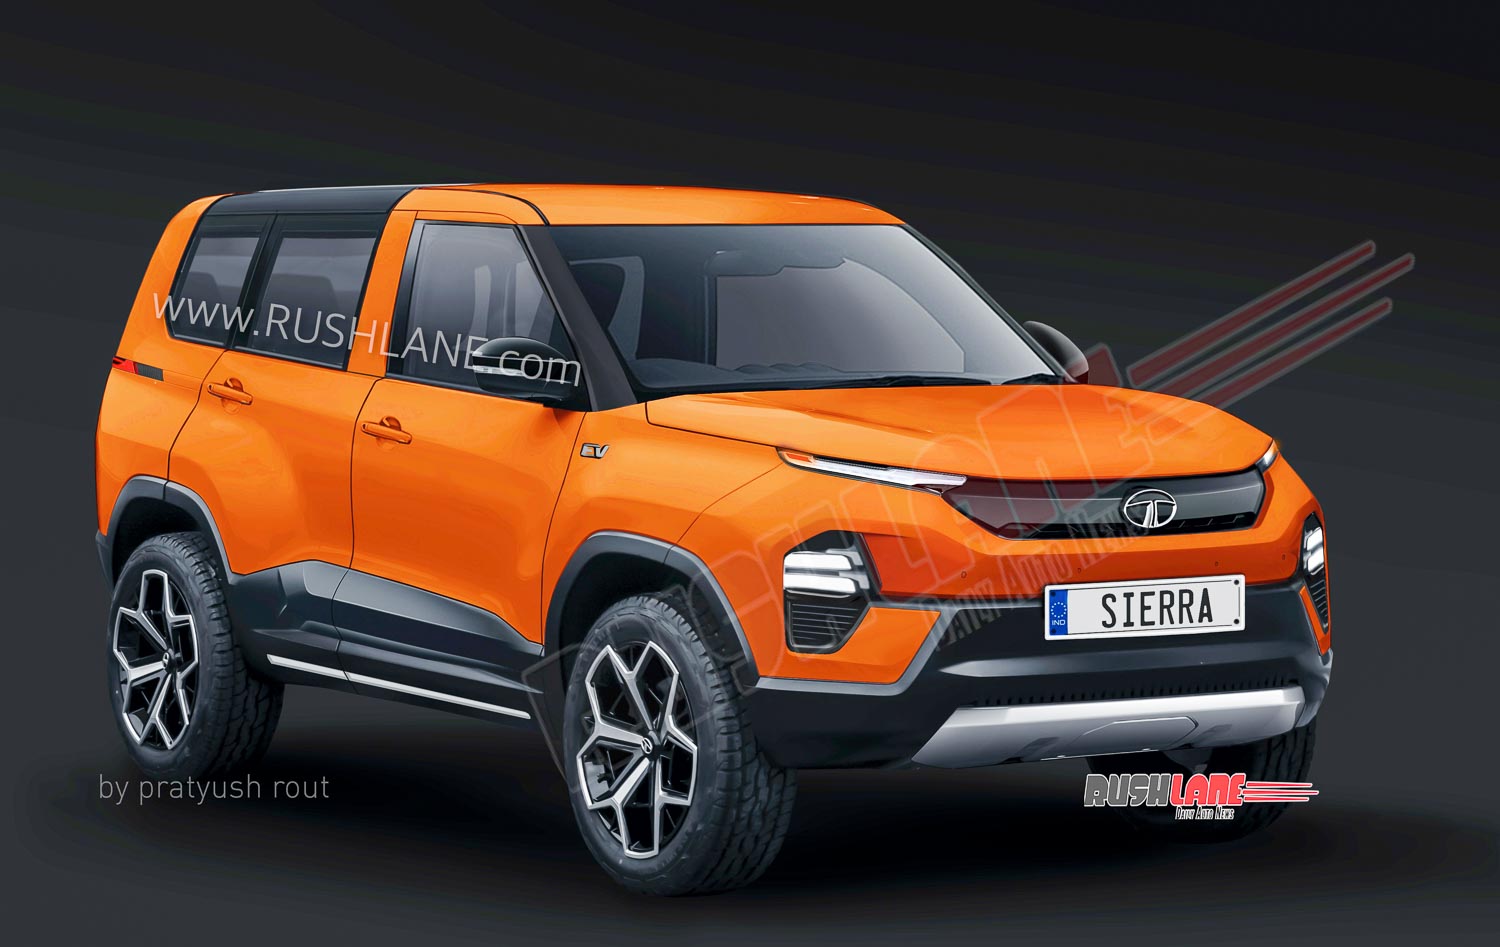 Tata Sierra EV- Price, Launch Date 2021, Features, News